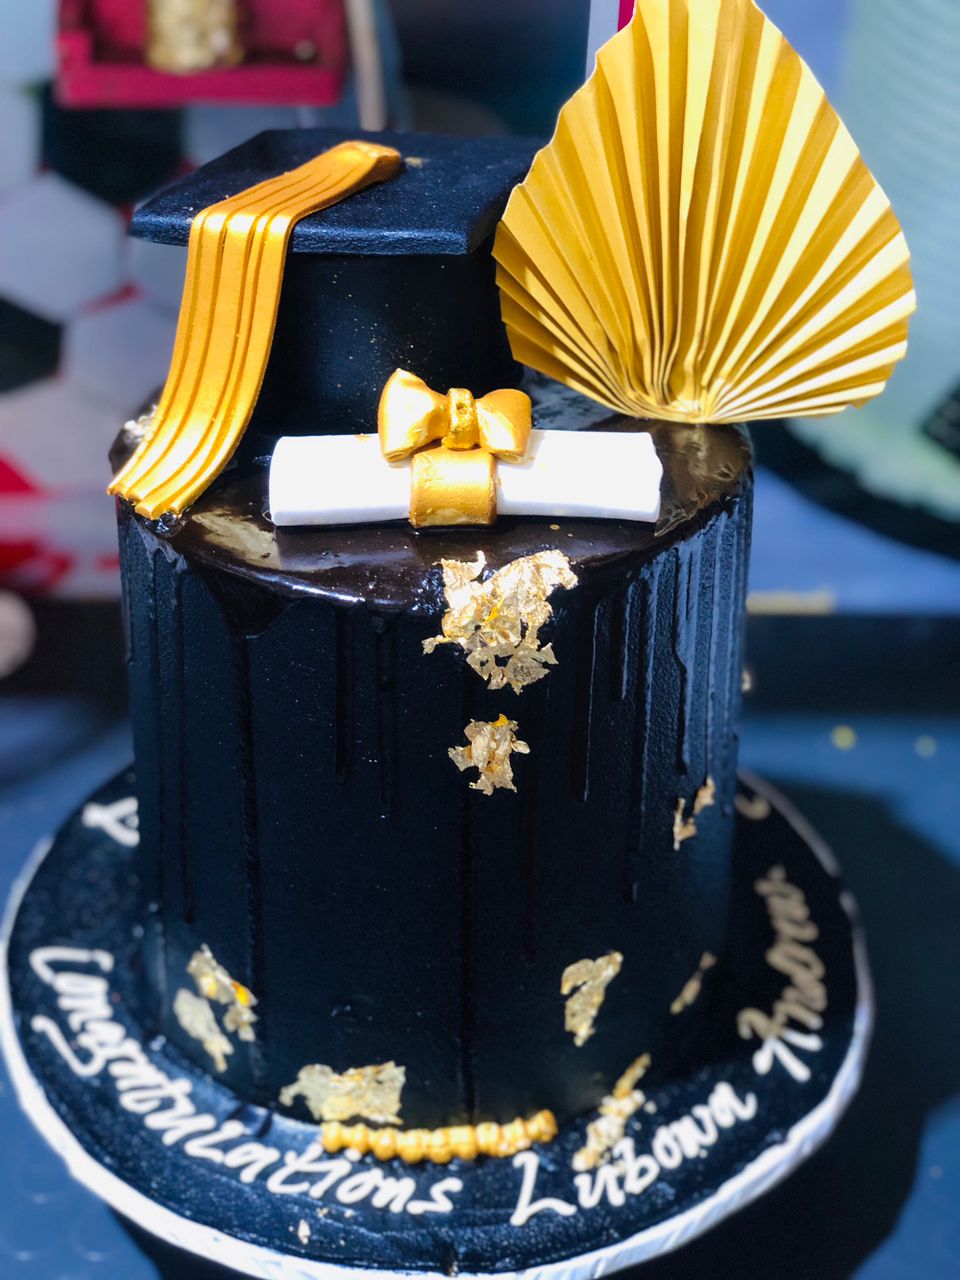 GOLD AND BLACK THEMED GRADUATION CAKE 